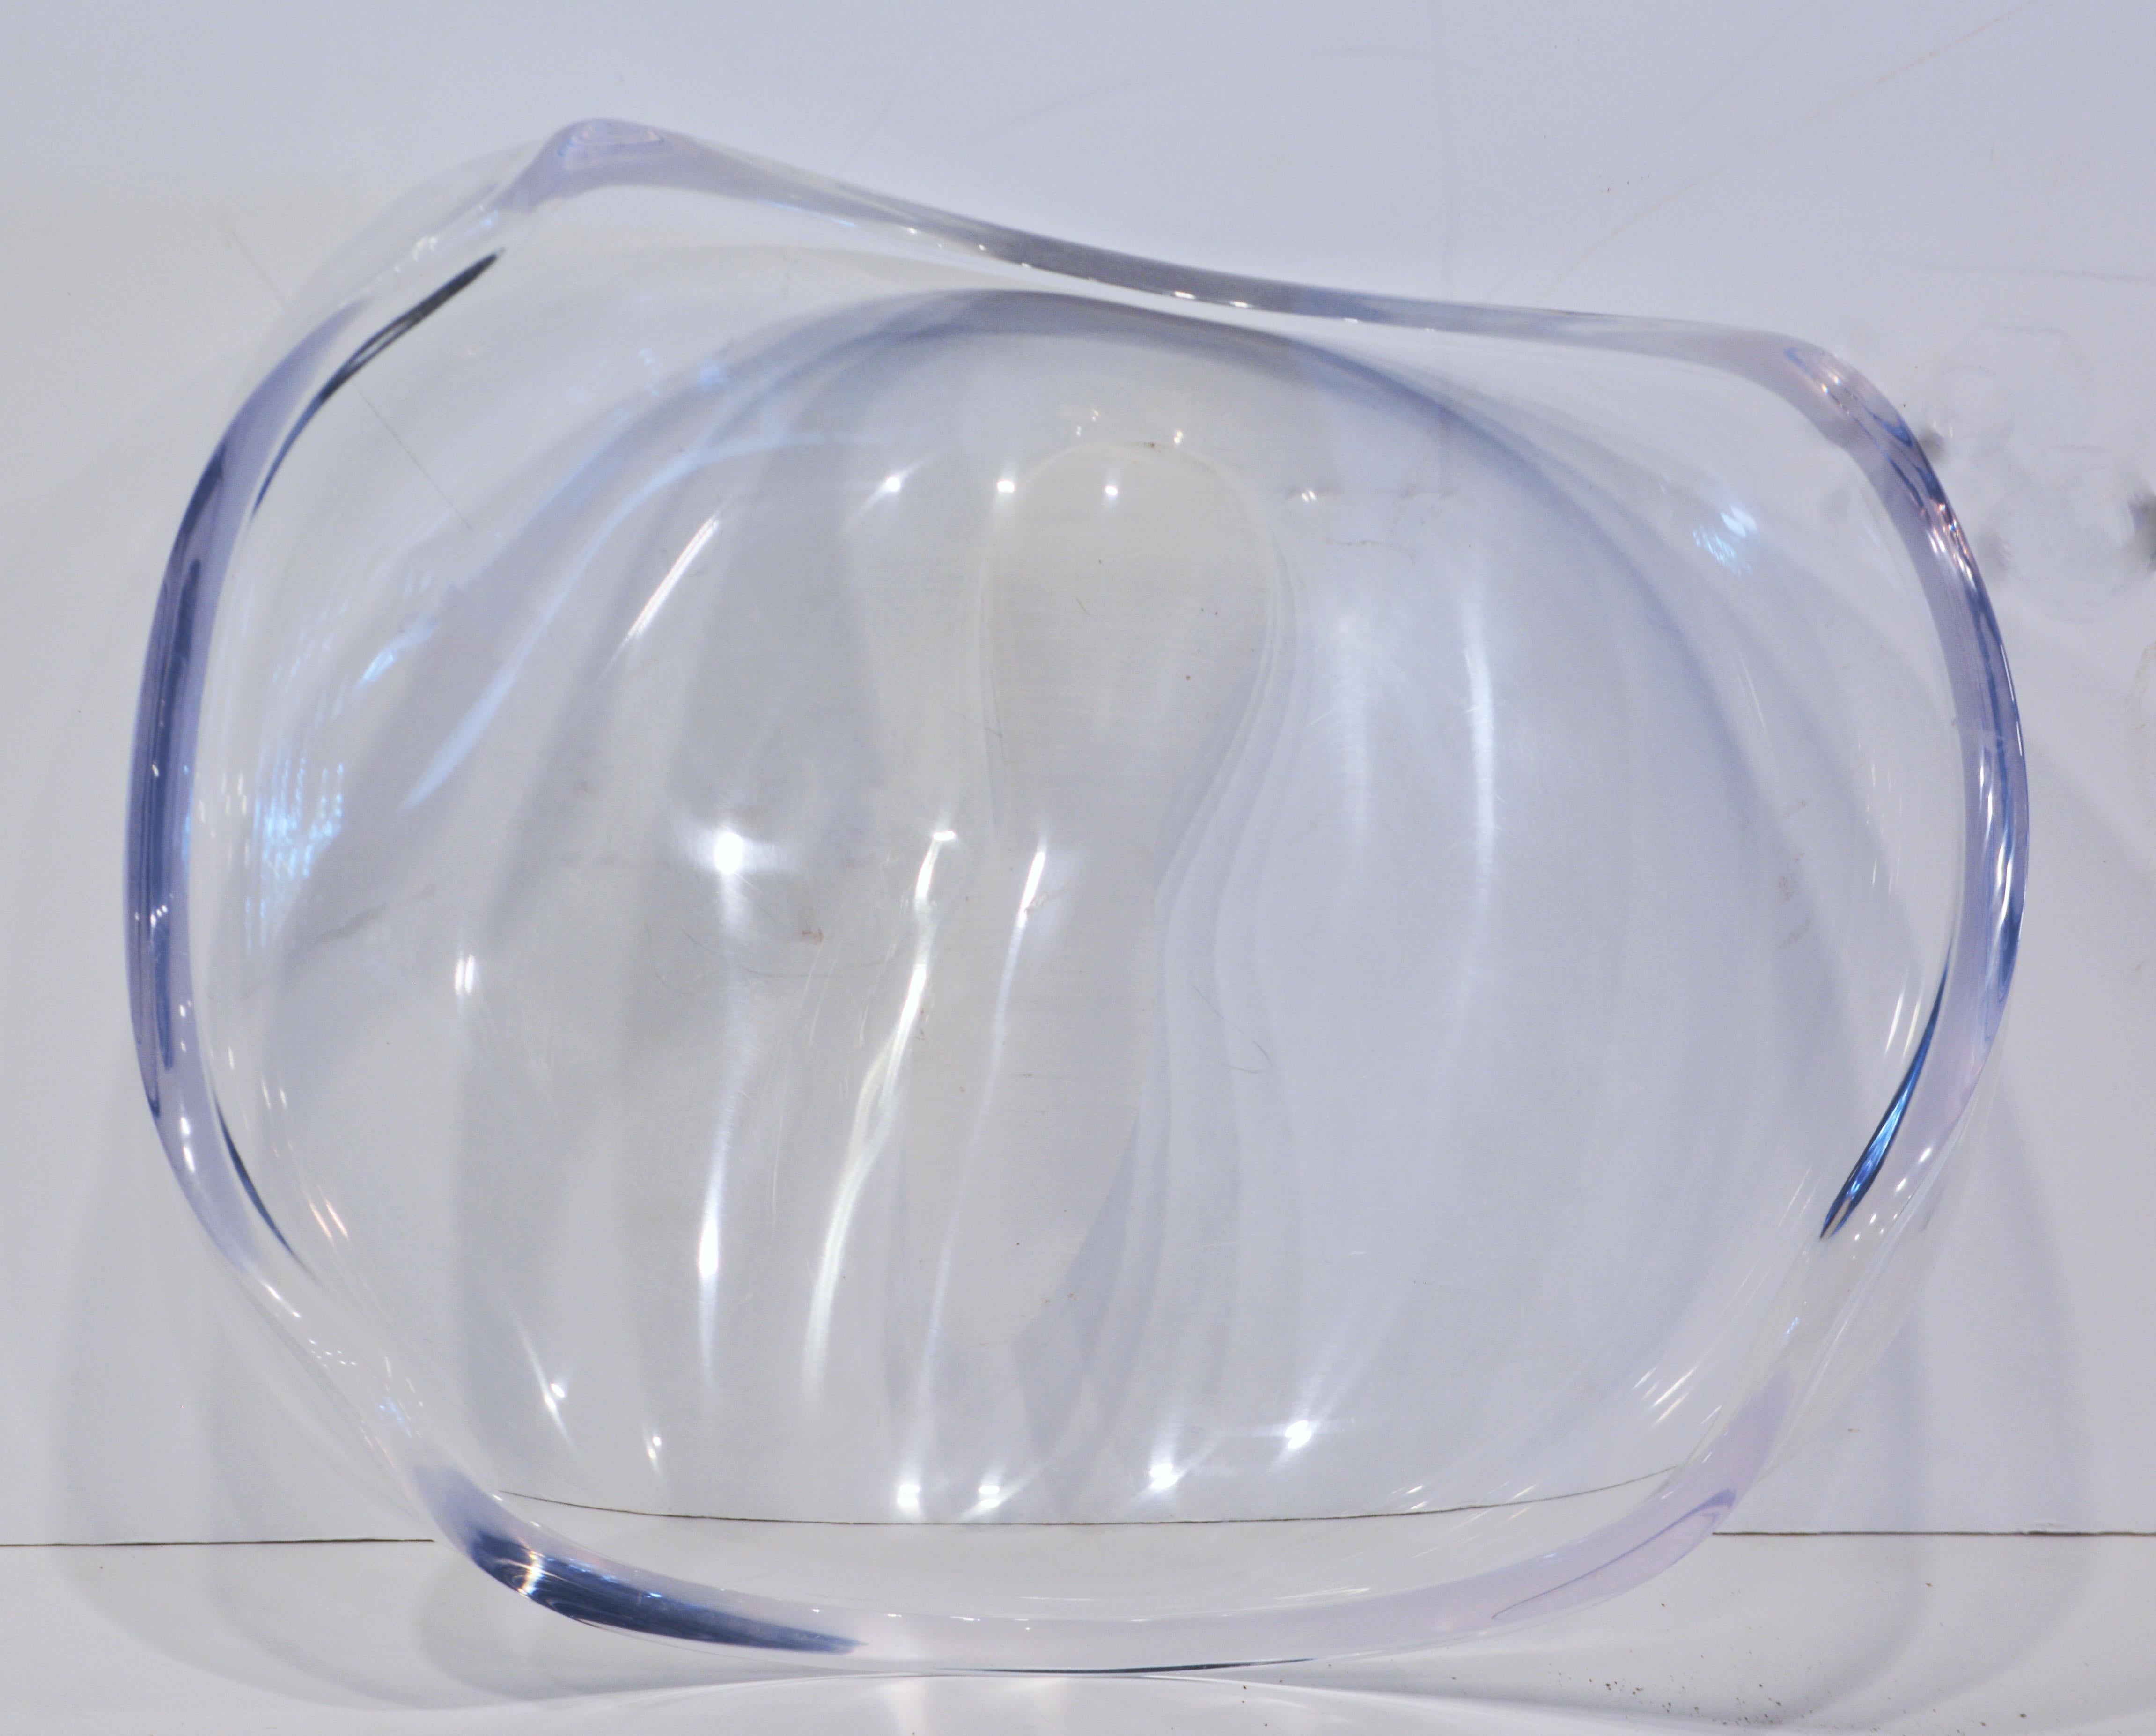 Large Lucite Biomorphic Freeform 'Astrolite' Bowl Attributed to Ritts Co. of LA 1